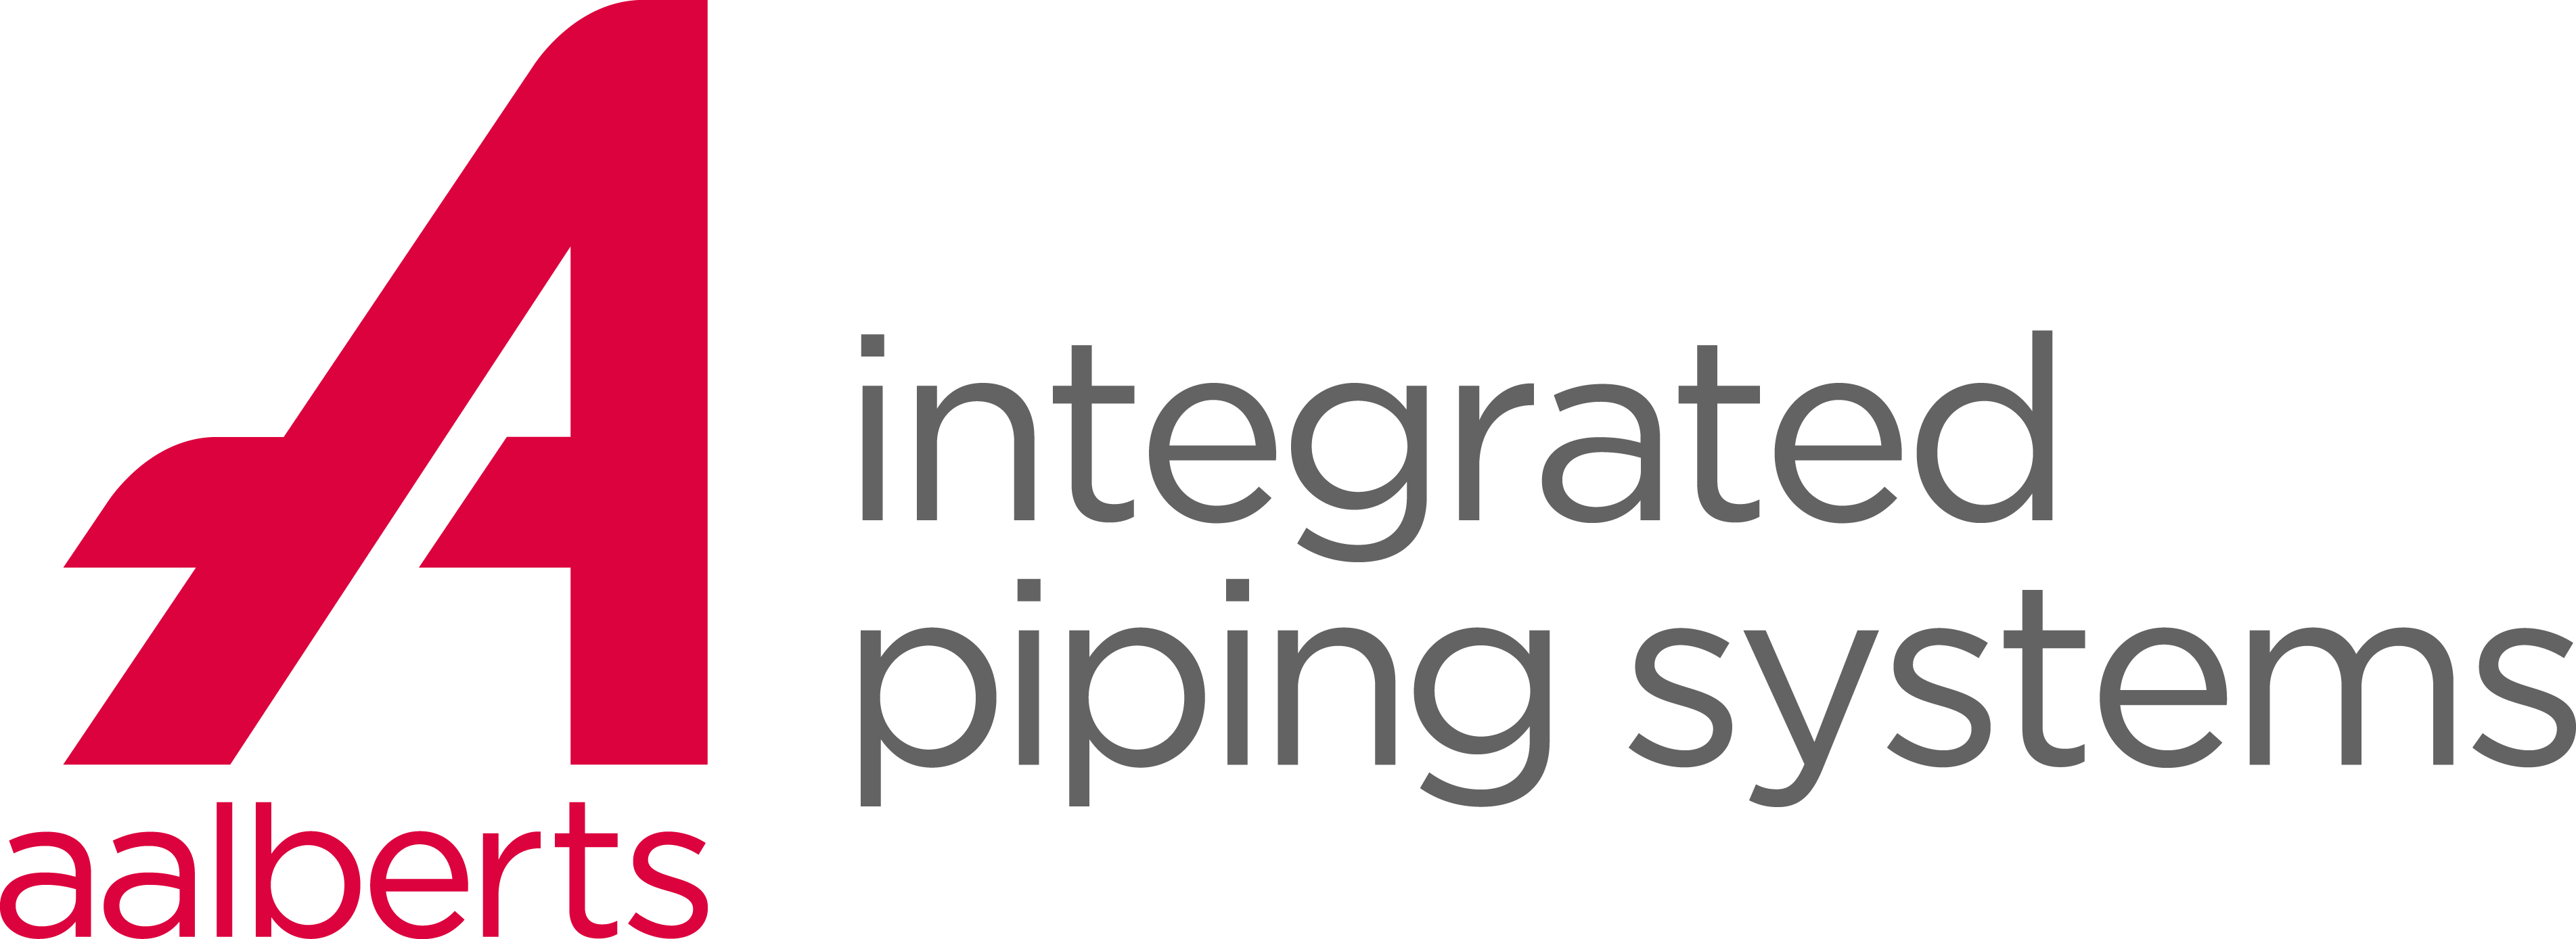 AALBERTS INTEGRATED PIPING SYSTEMS